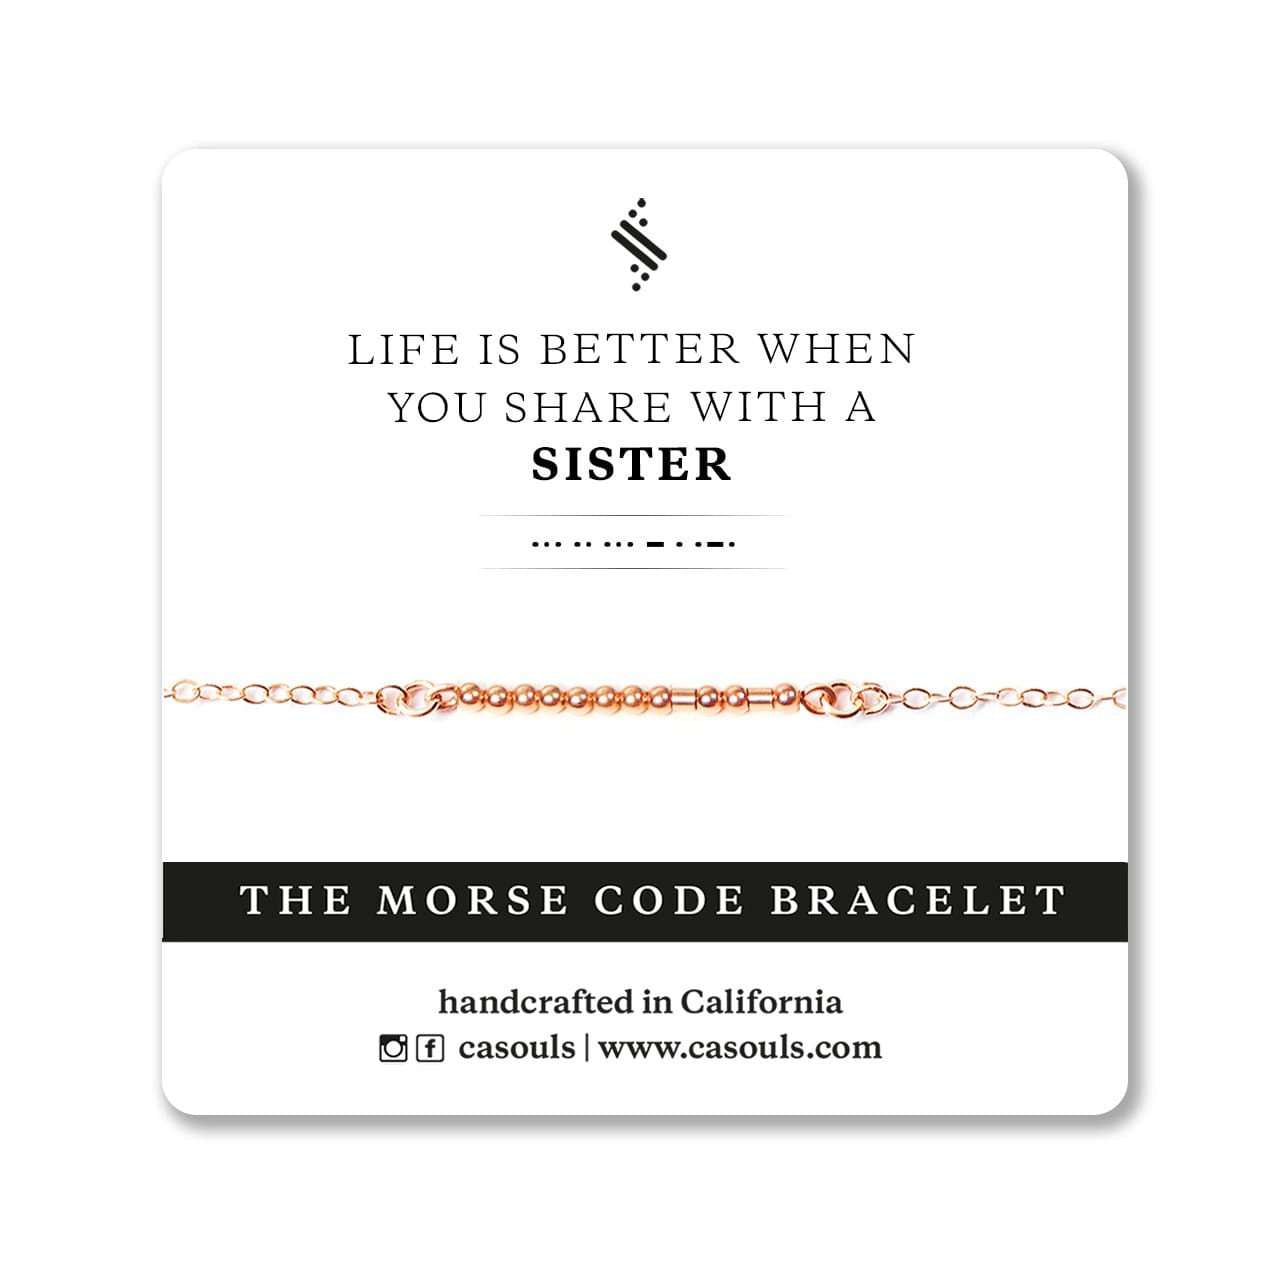 LIFE IS BETTER WITH A SISTER - MORSE CODE BRACELET